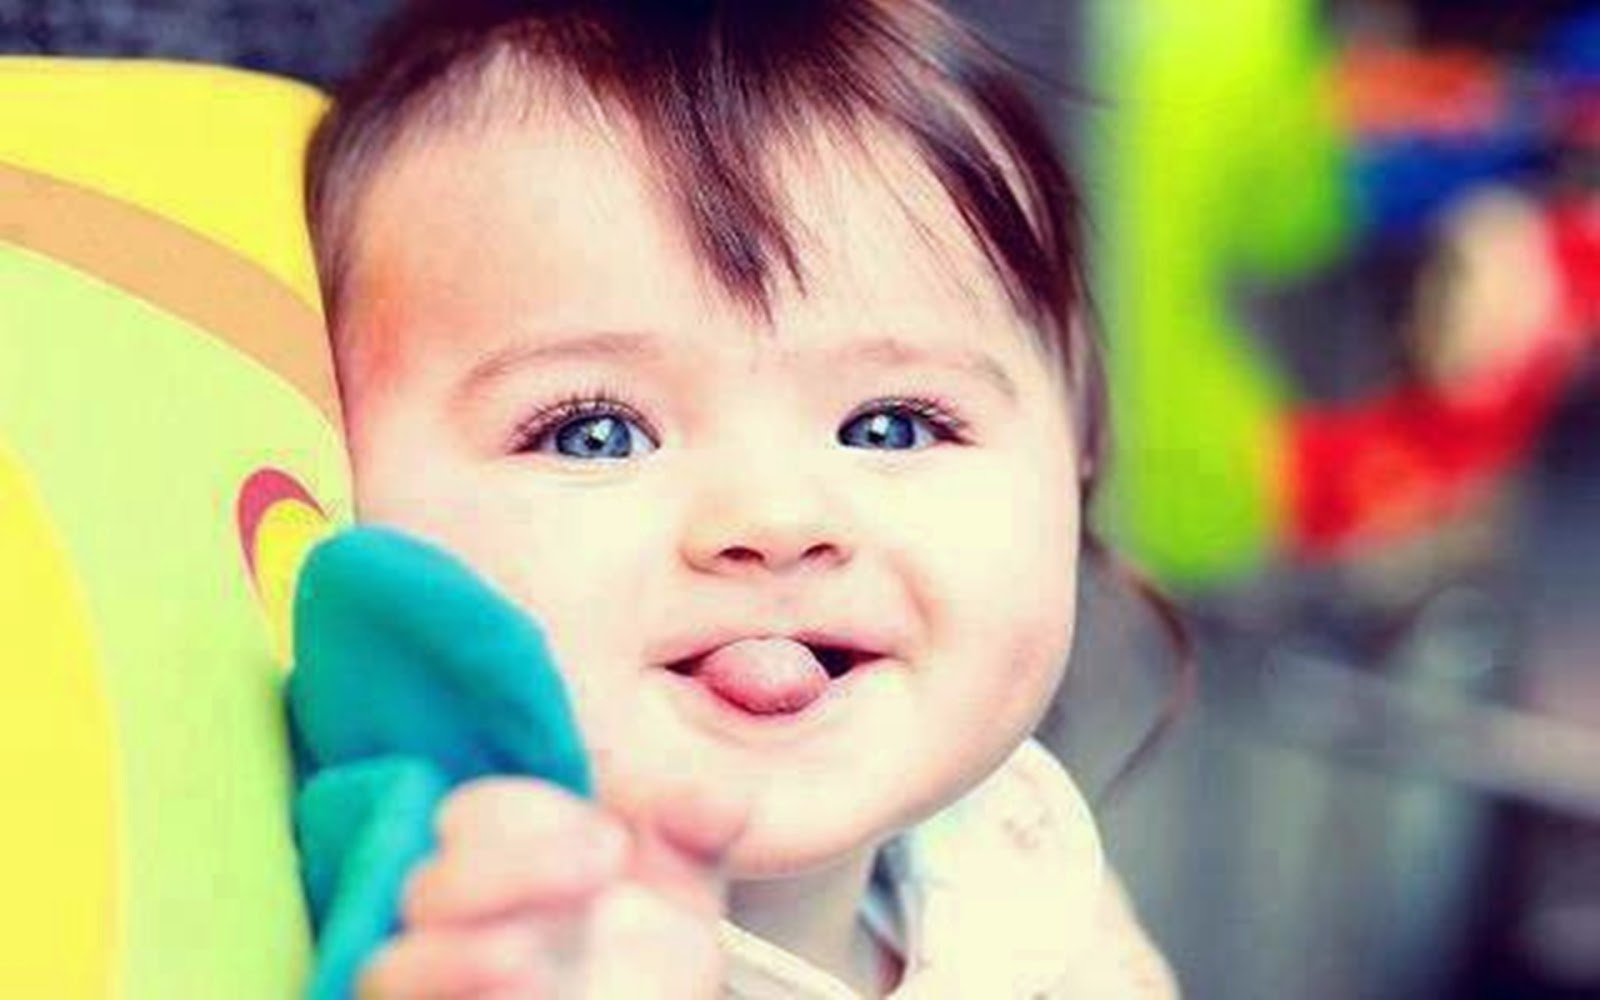 World Cutest Baby wallpapers 2014 Charming collection of